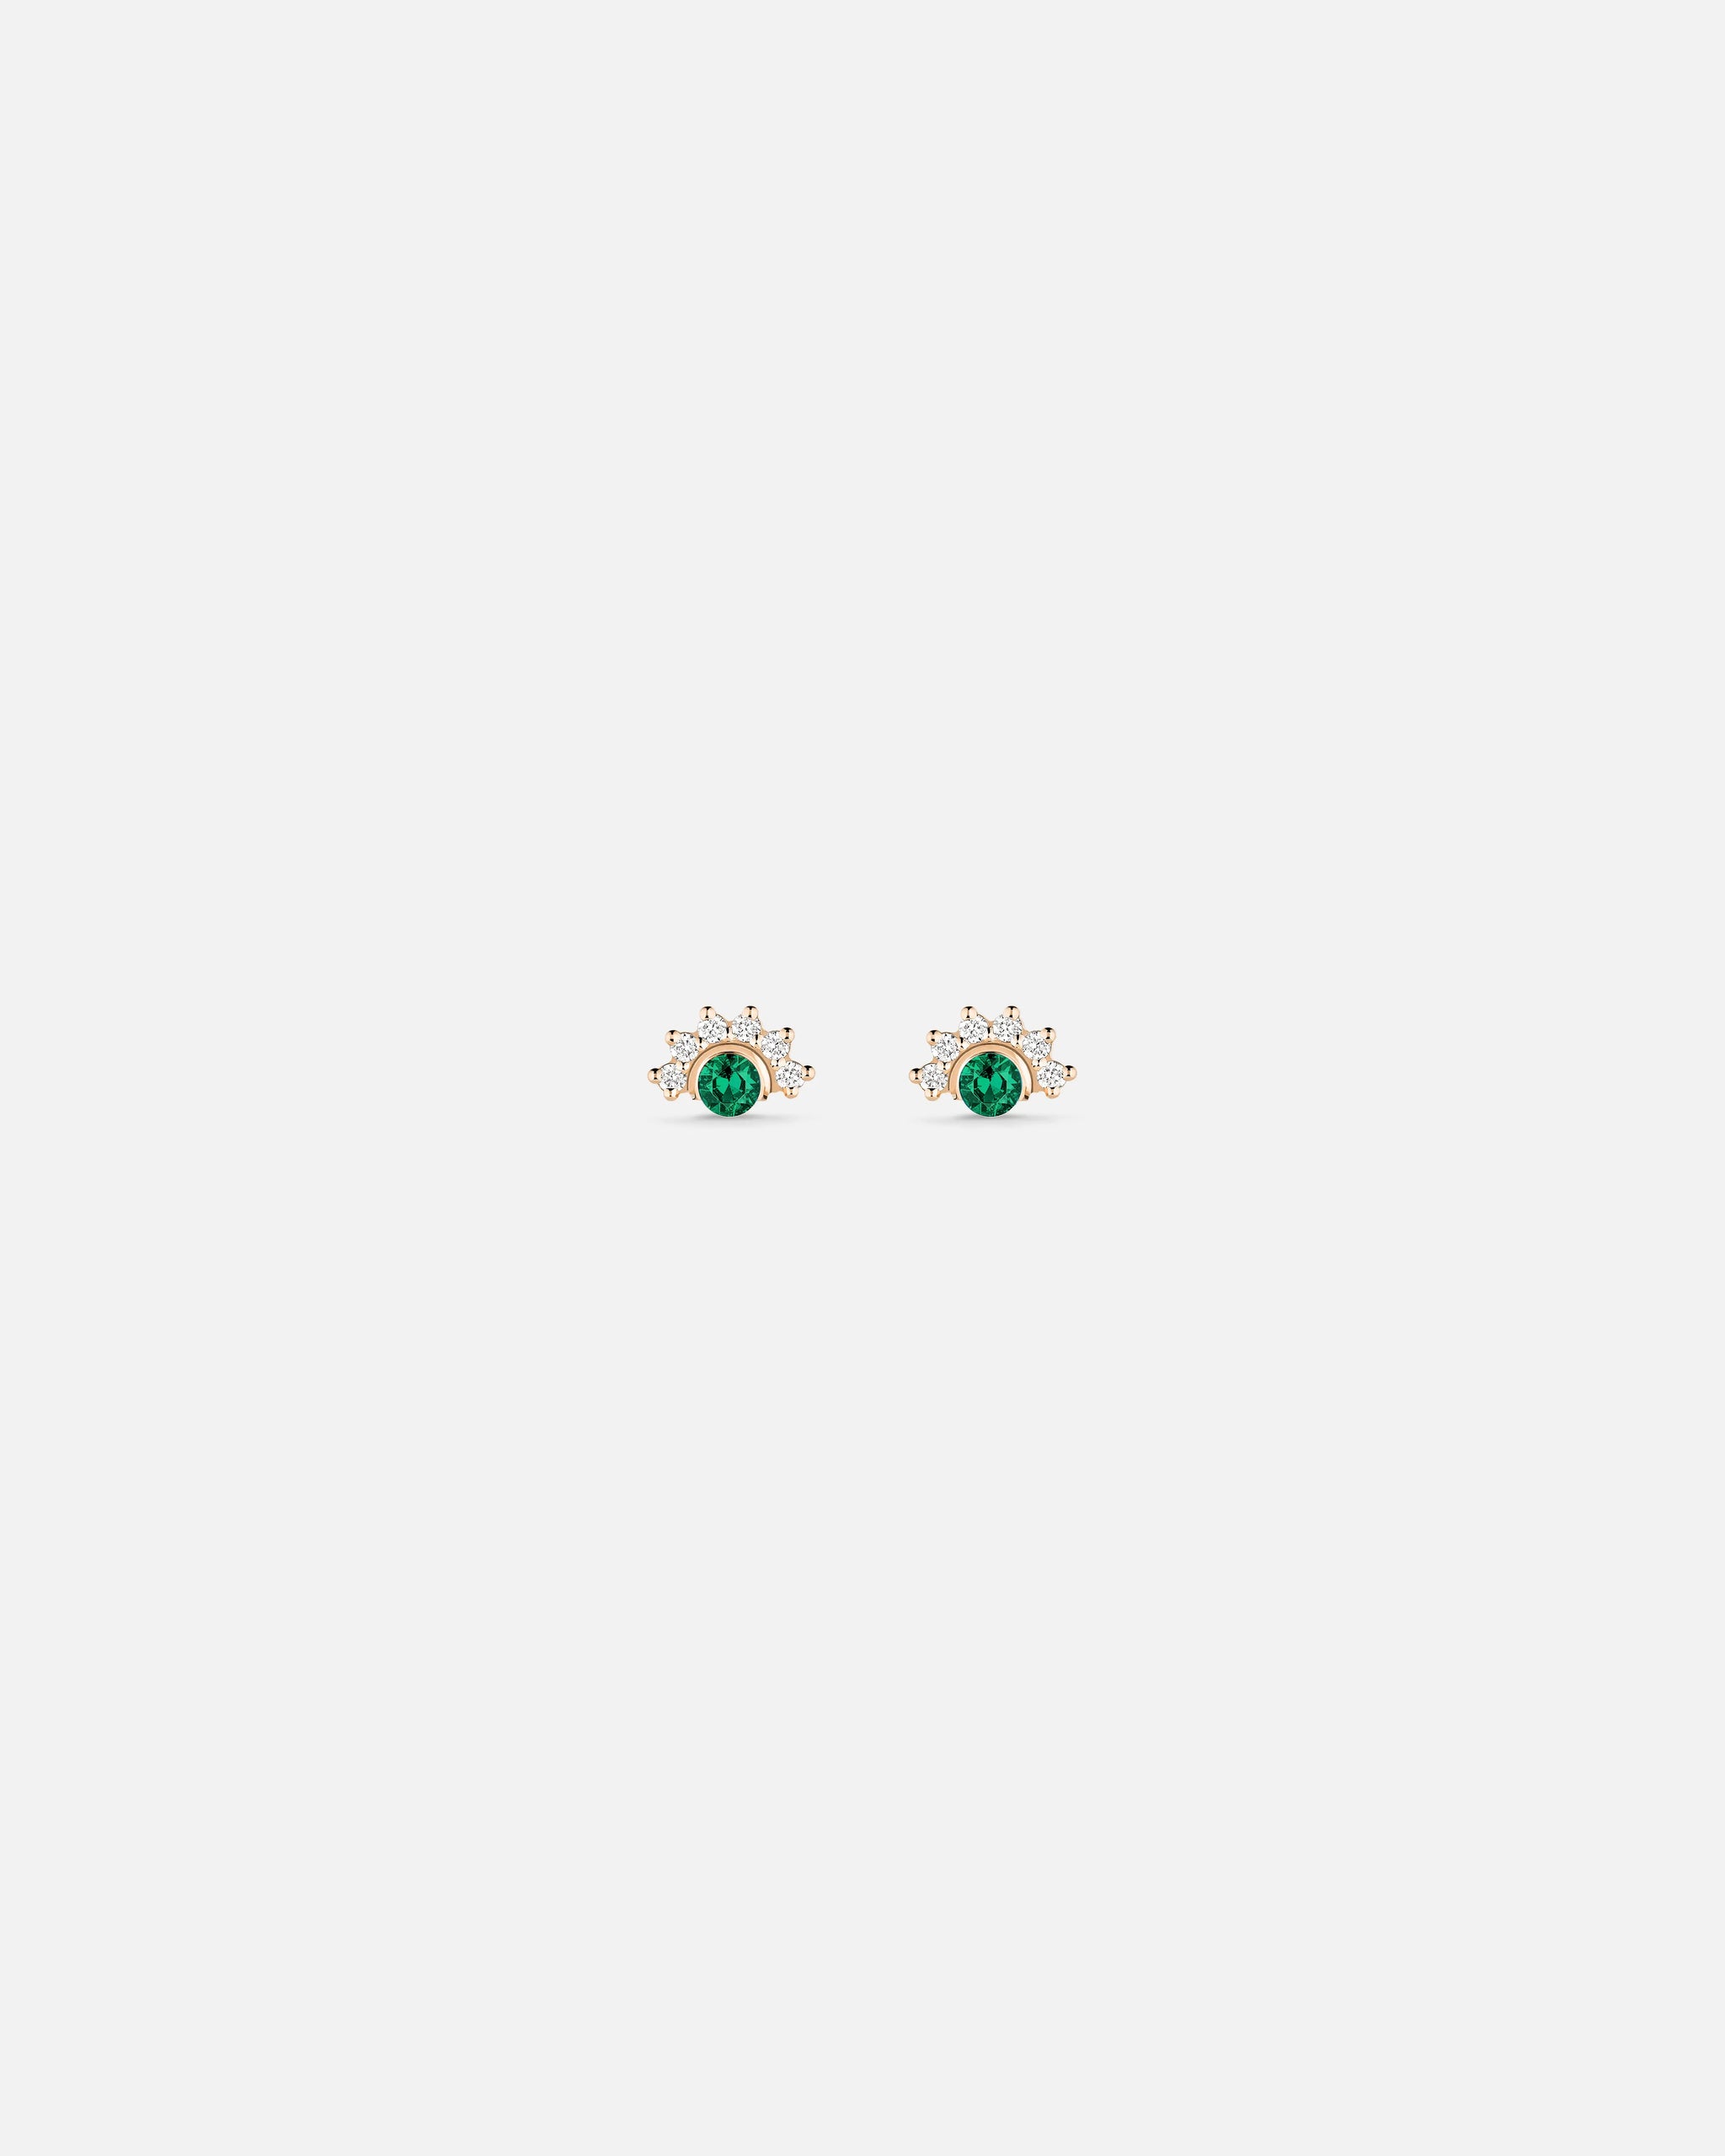 Green Tourmaline Studs in Rose Gold - Nouvel Heritage - Nouvel Heritage